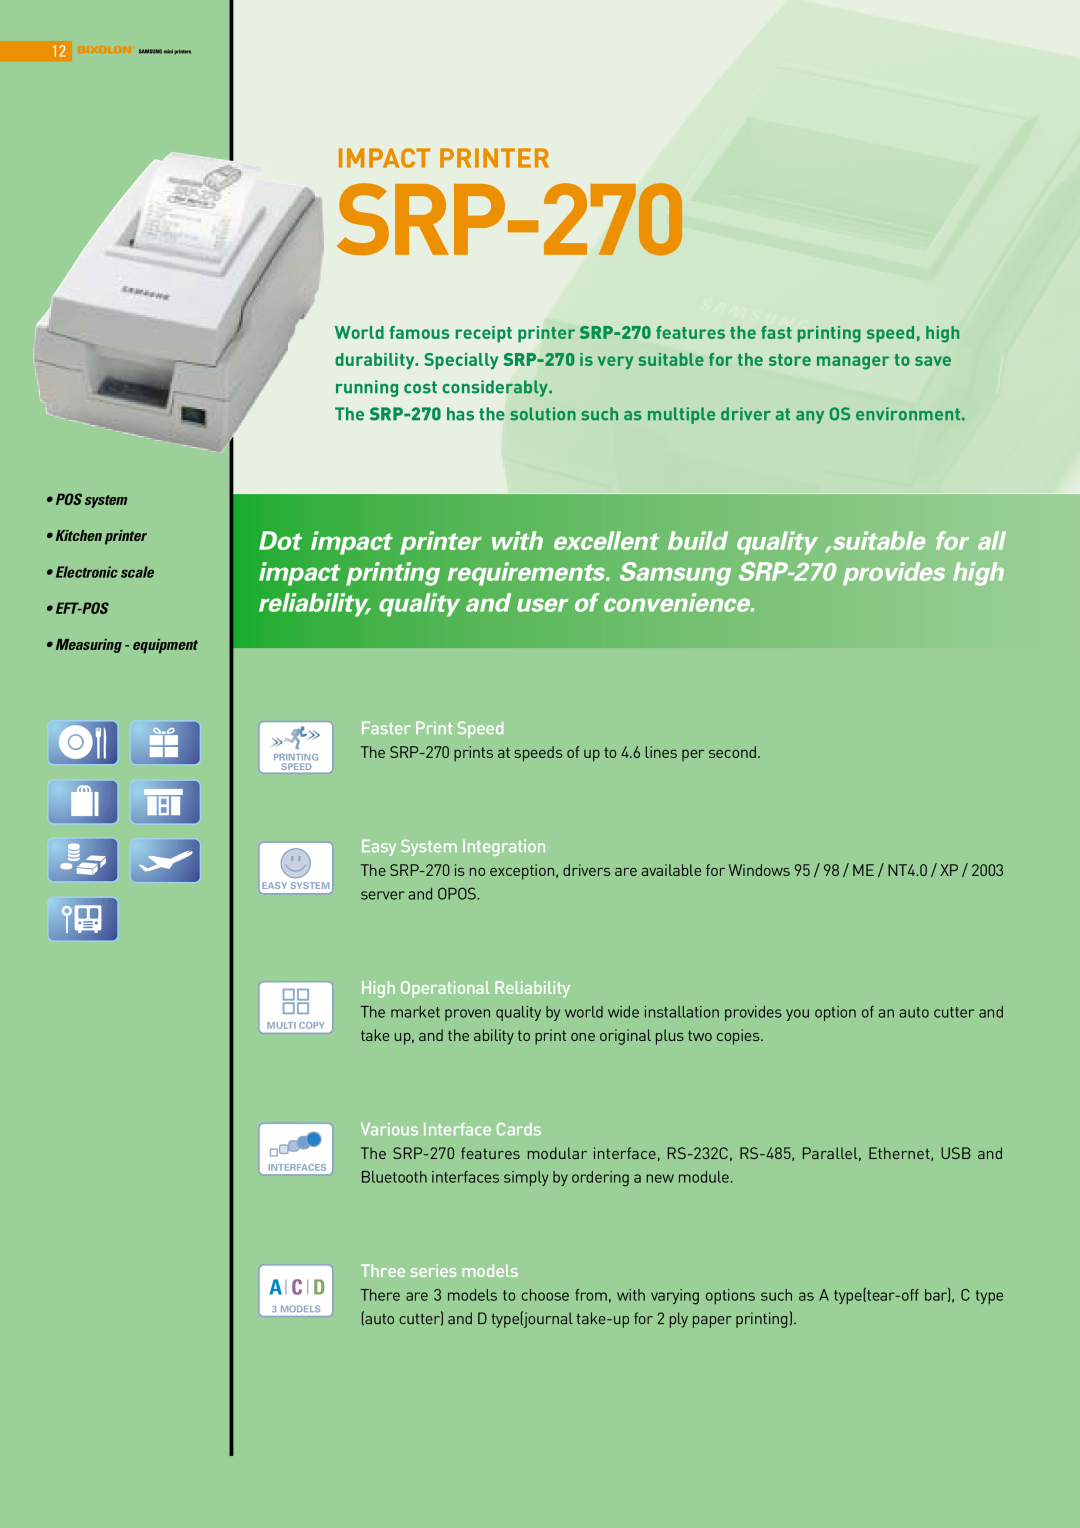 Samsung SRP-370 manual SRP-270, Impact Printer, Faster Print Speed, Easy System Integration, High Operational Reliability 